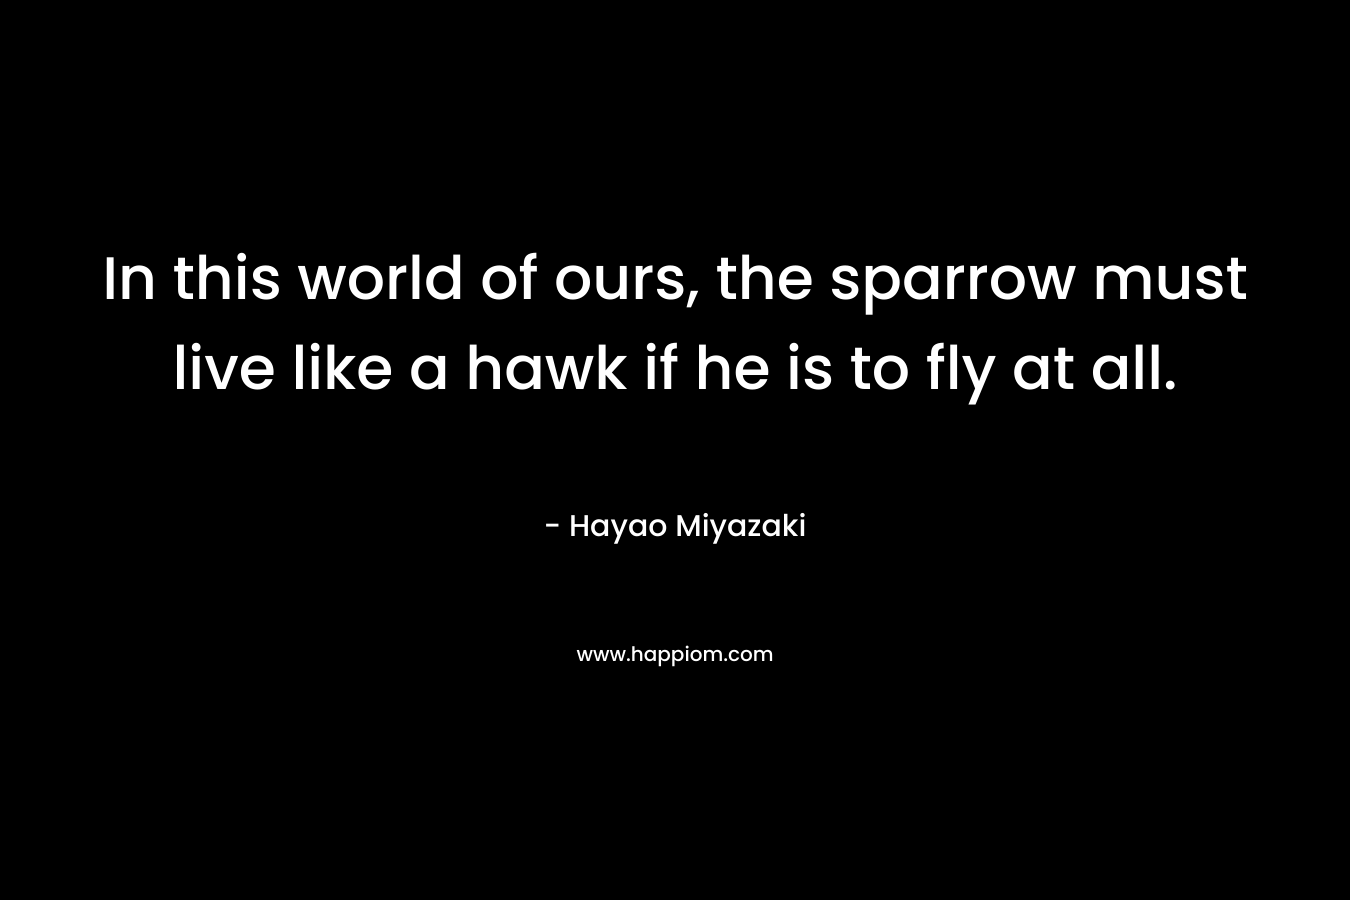 In this world of ours, the sparrow must live like a hawk if he is to fly at all.